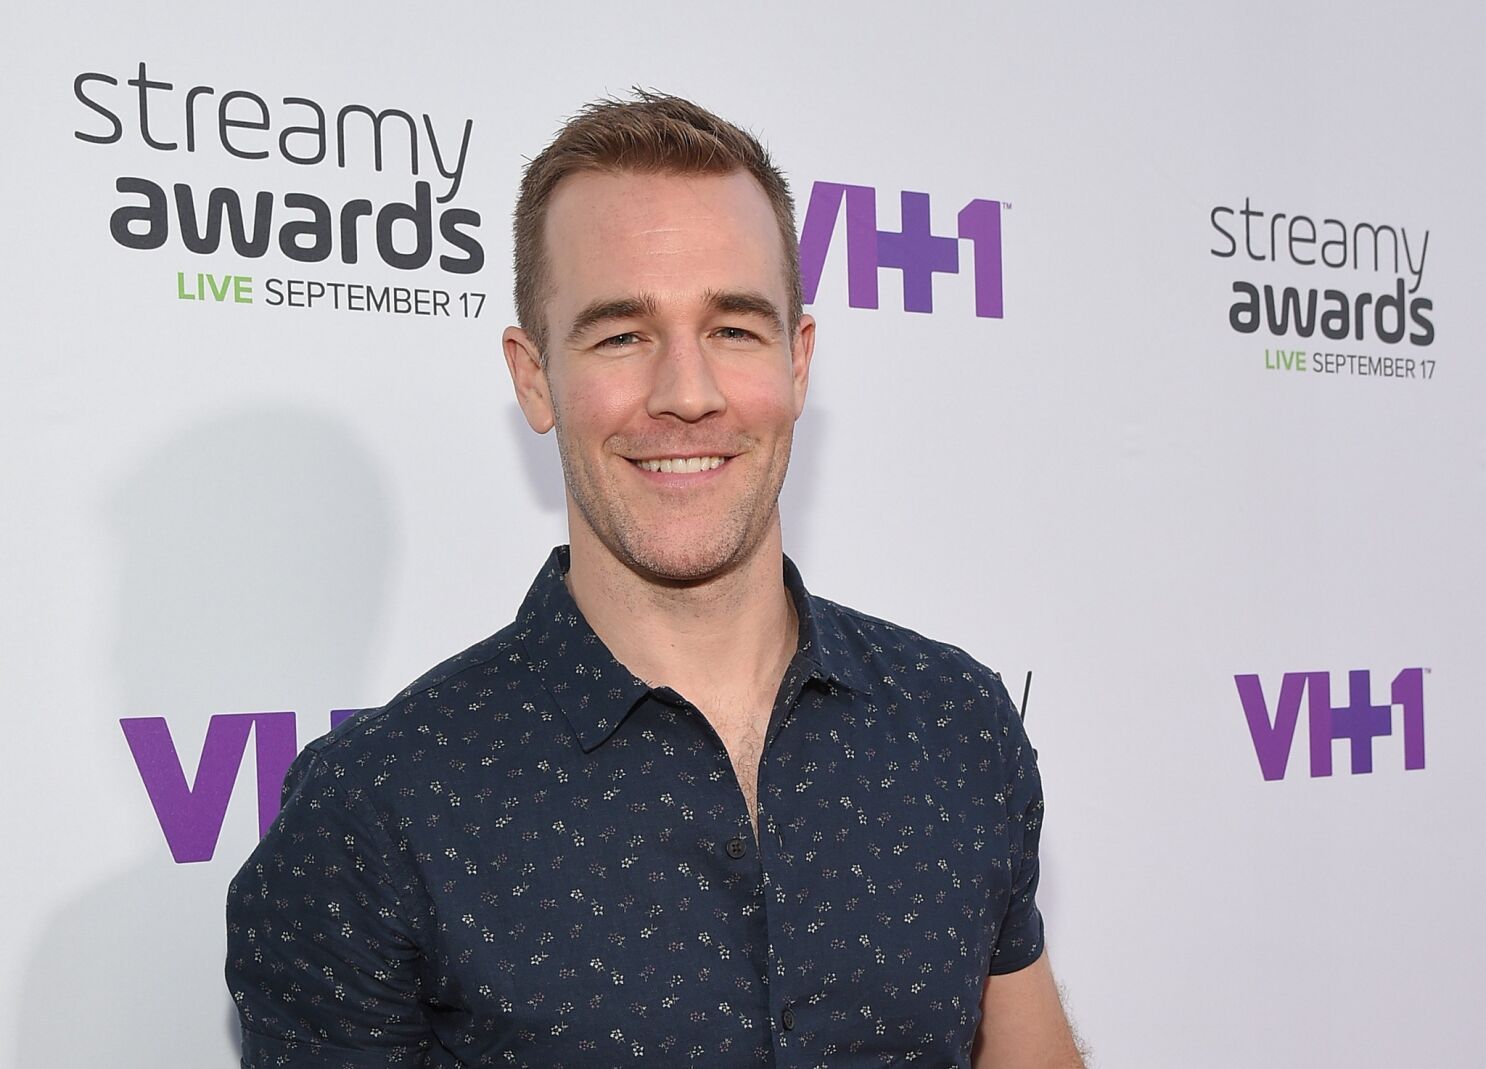 Who Was James Van Der Beek, the Person Who Played In Web Series Dawson's Creek?